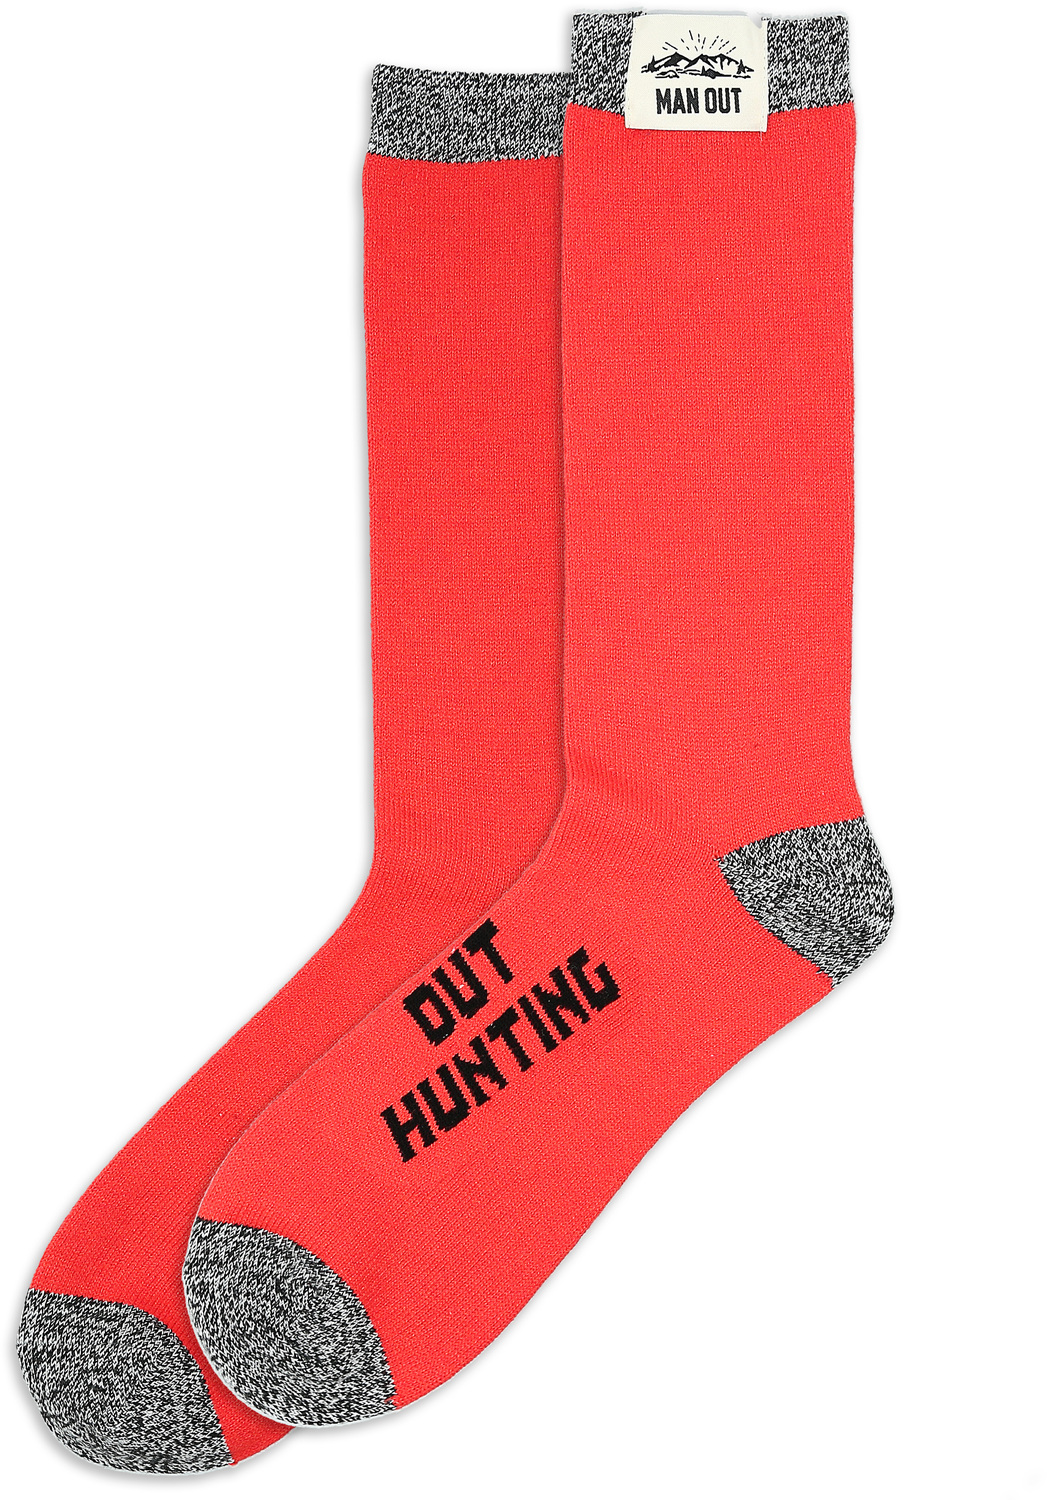 Out Hunting by Man Out - Out Hunting - Men's Socks